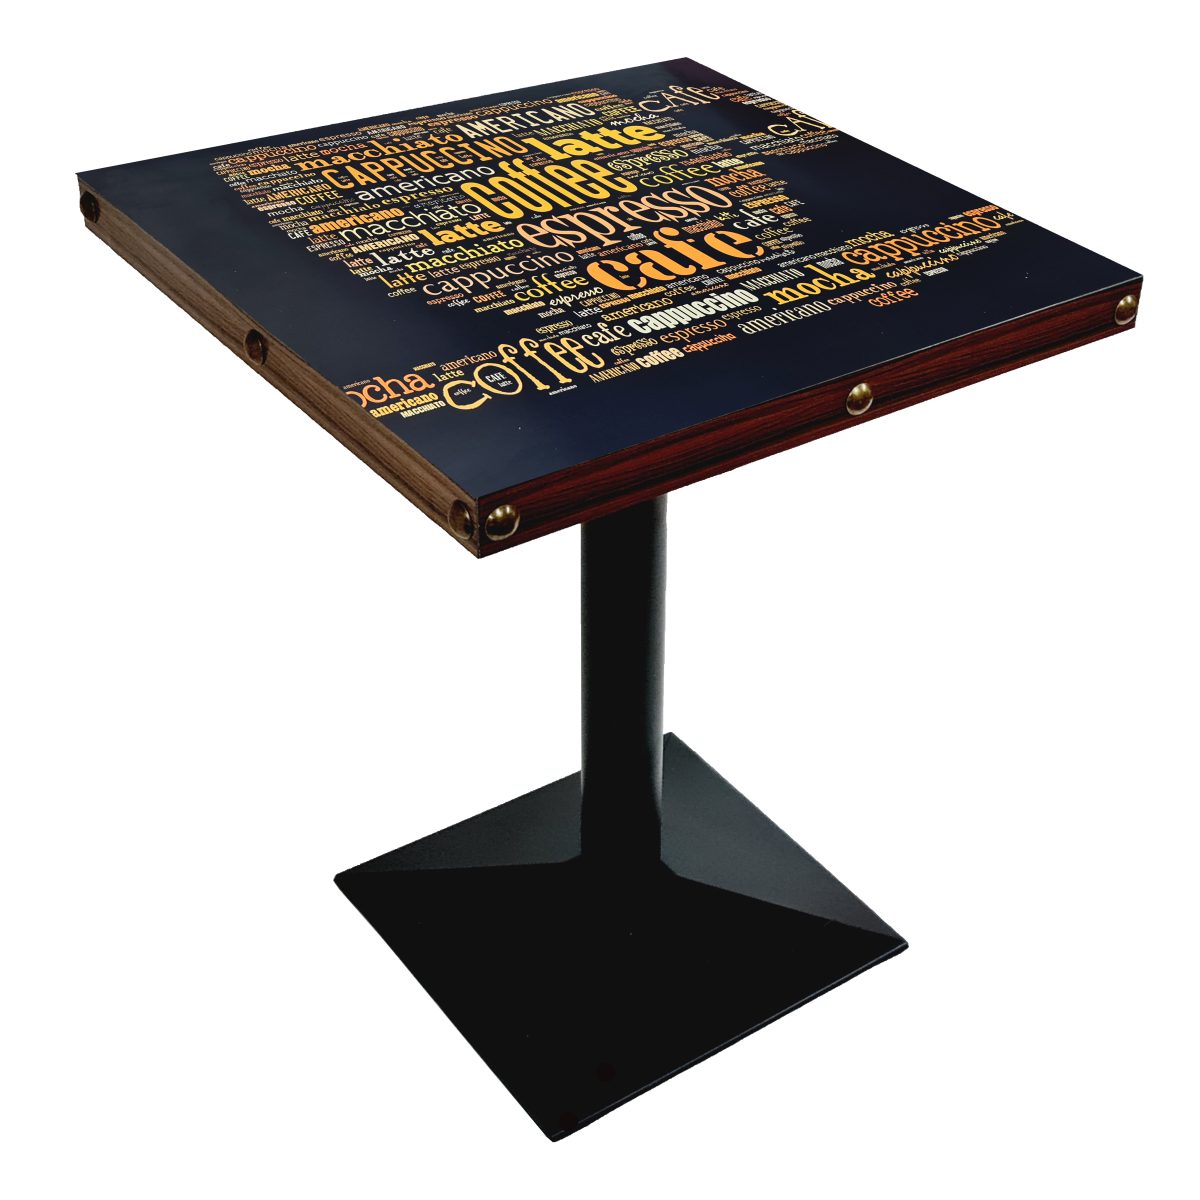 Custom Printed Table Top with Cast iron Legs Best Choice for Coffee Shops